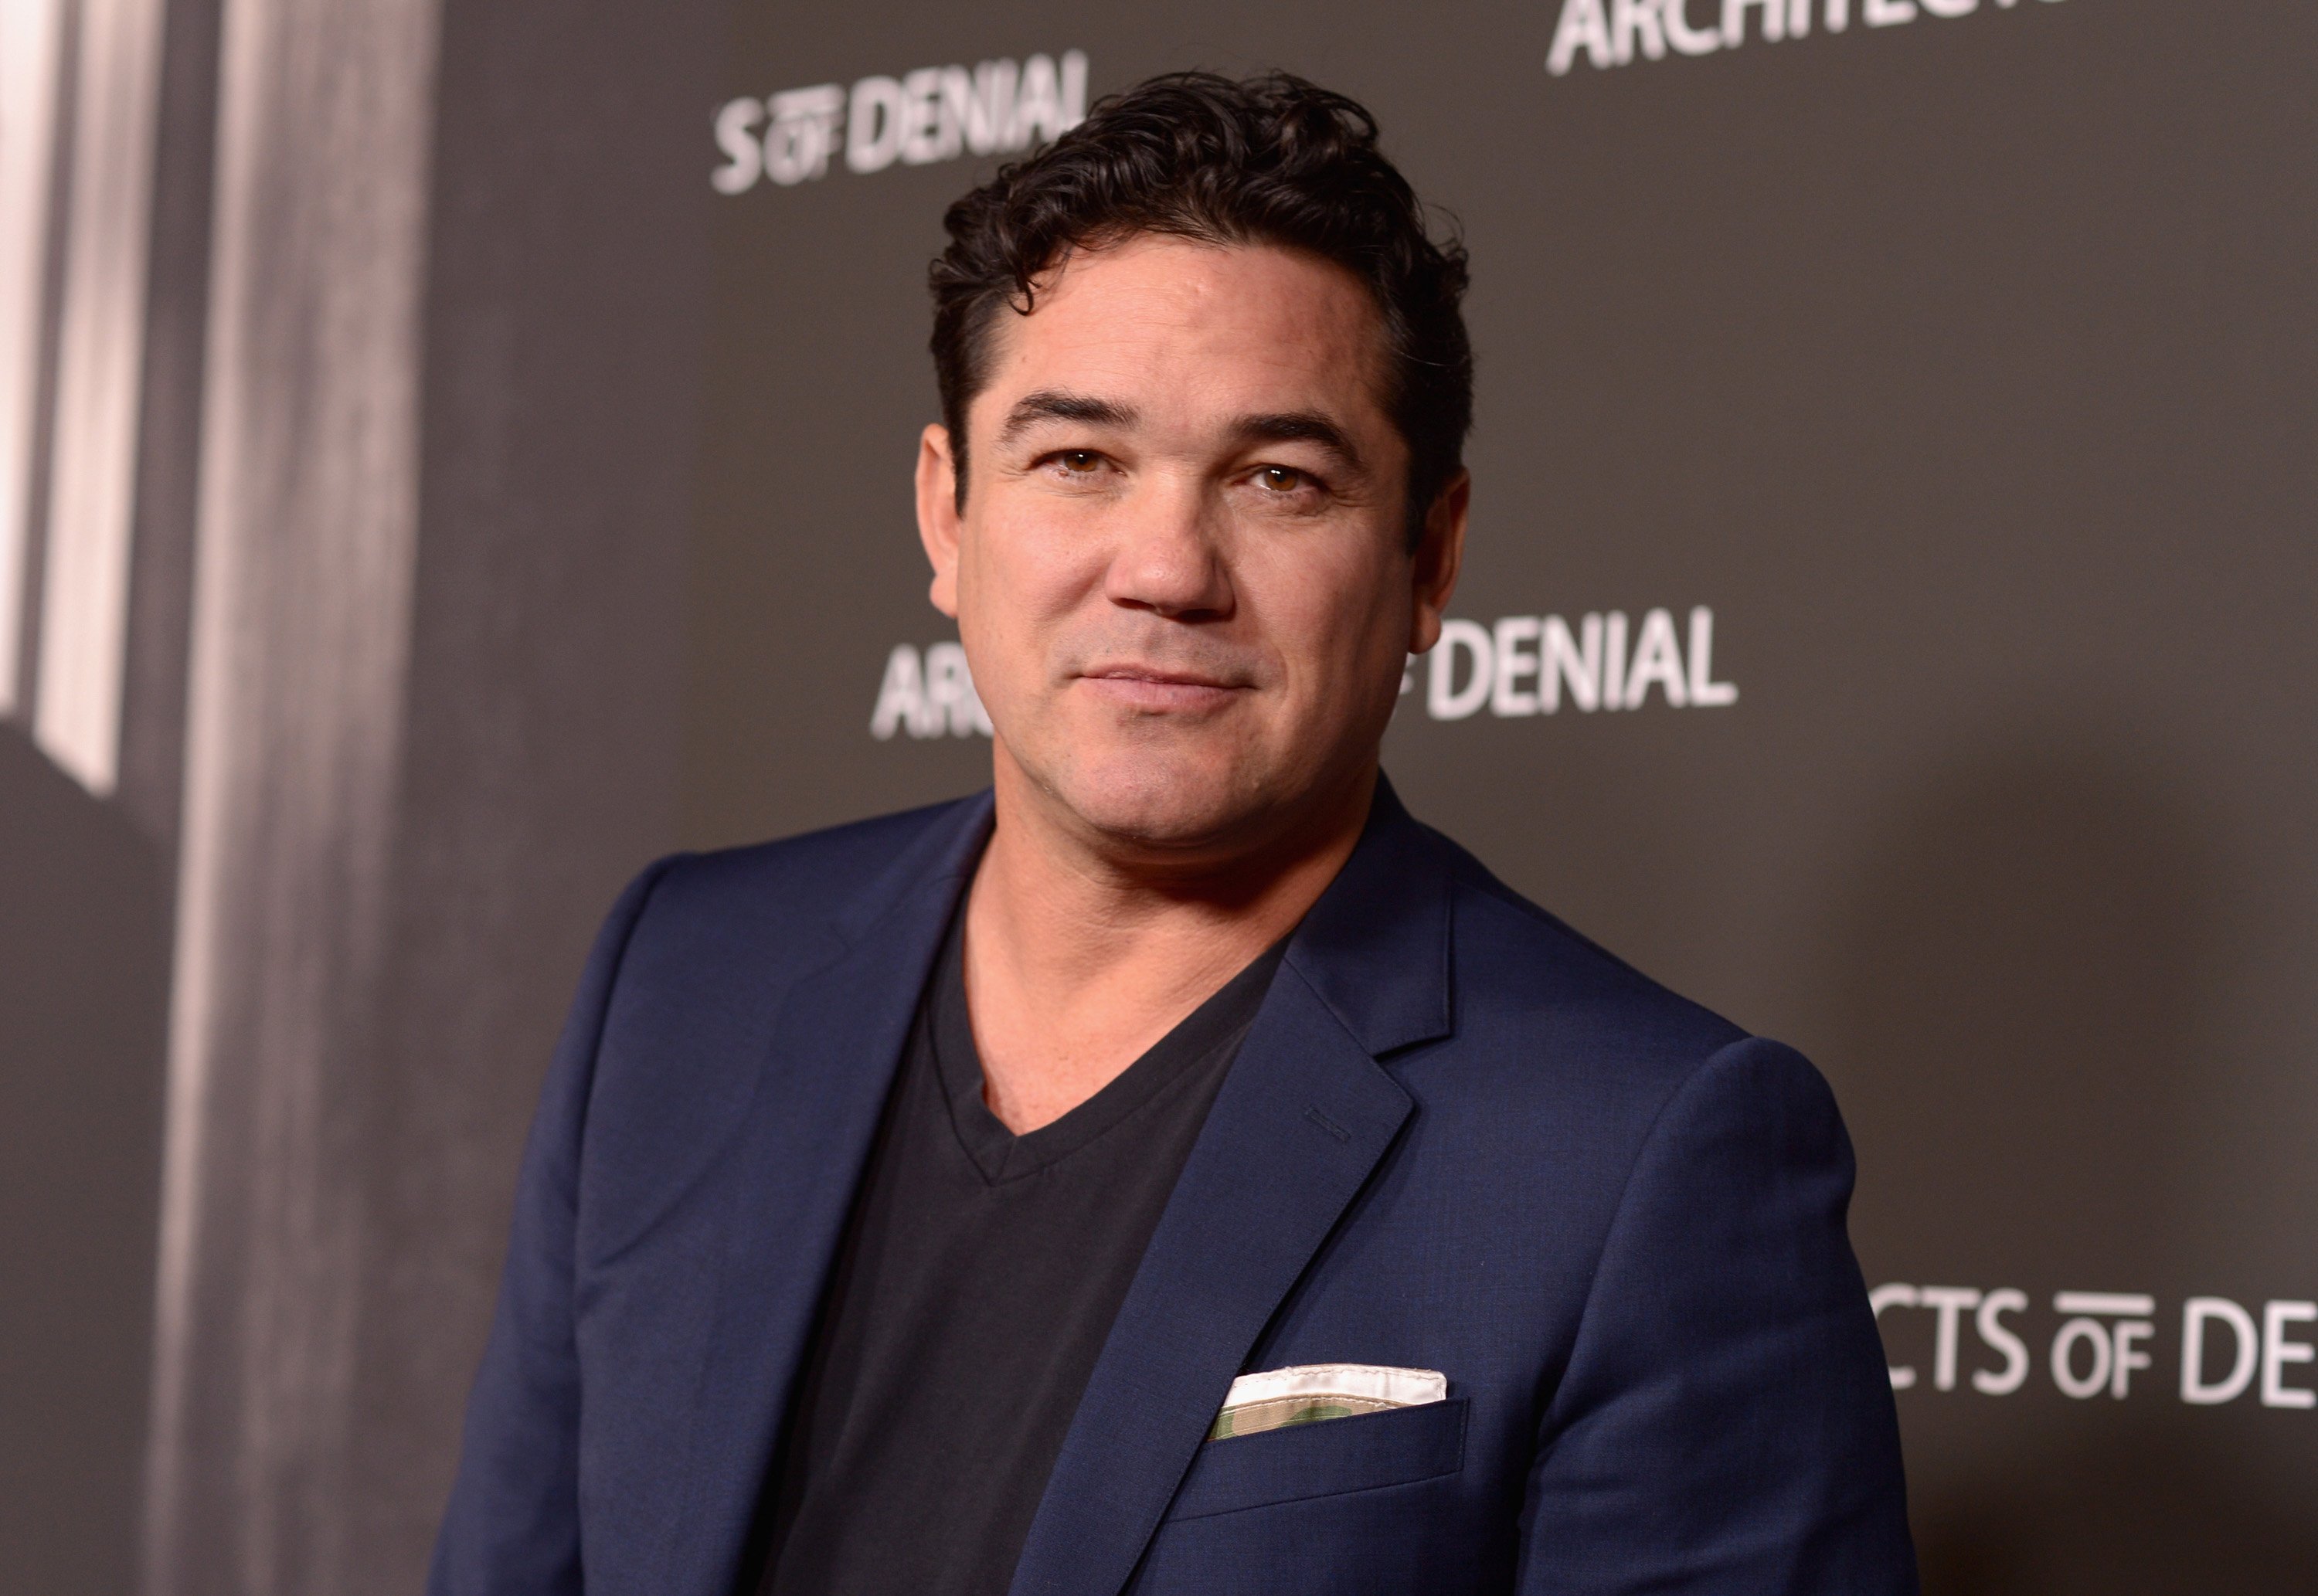 Dean Cain at the premiere of "Architects Of Denial" on October 3, 2017 in Los Angeles, California. | Photo: Getty Images